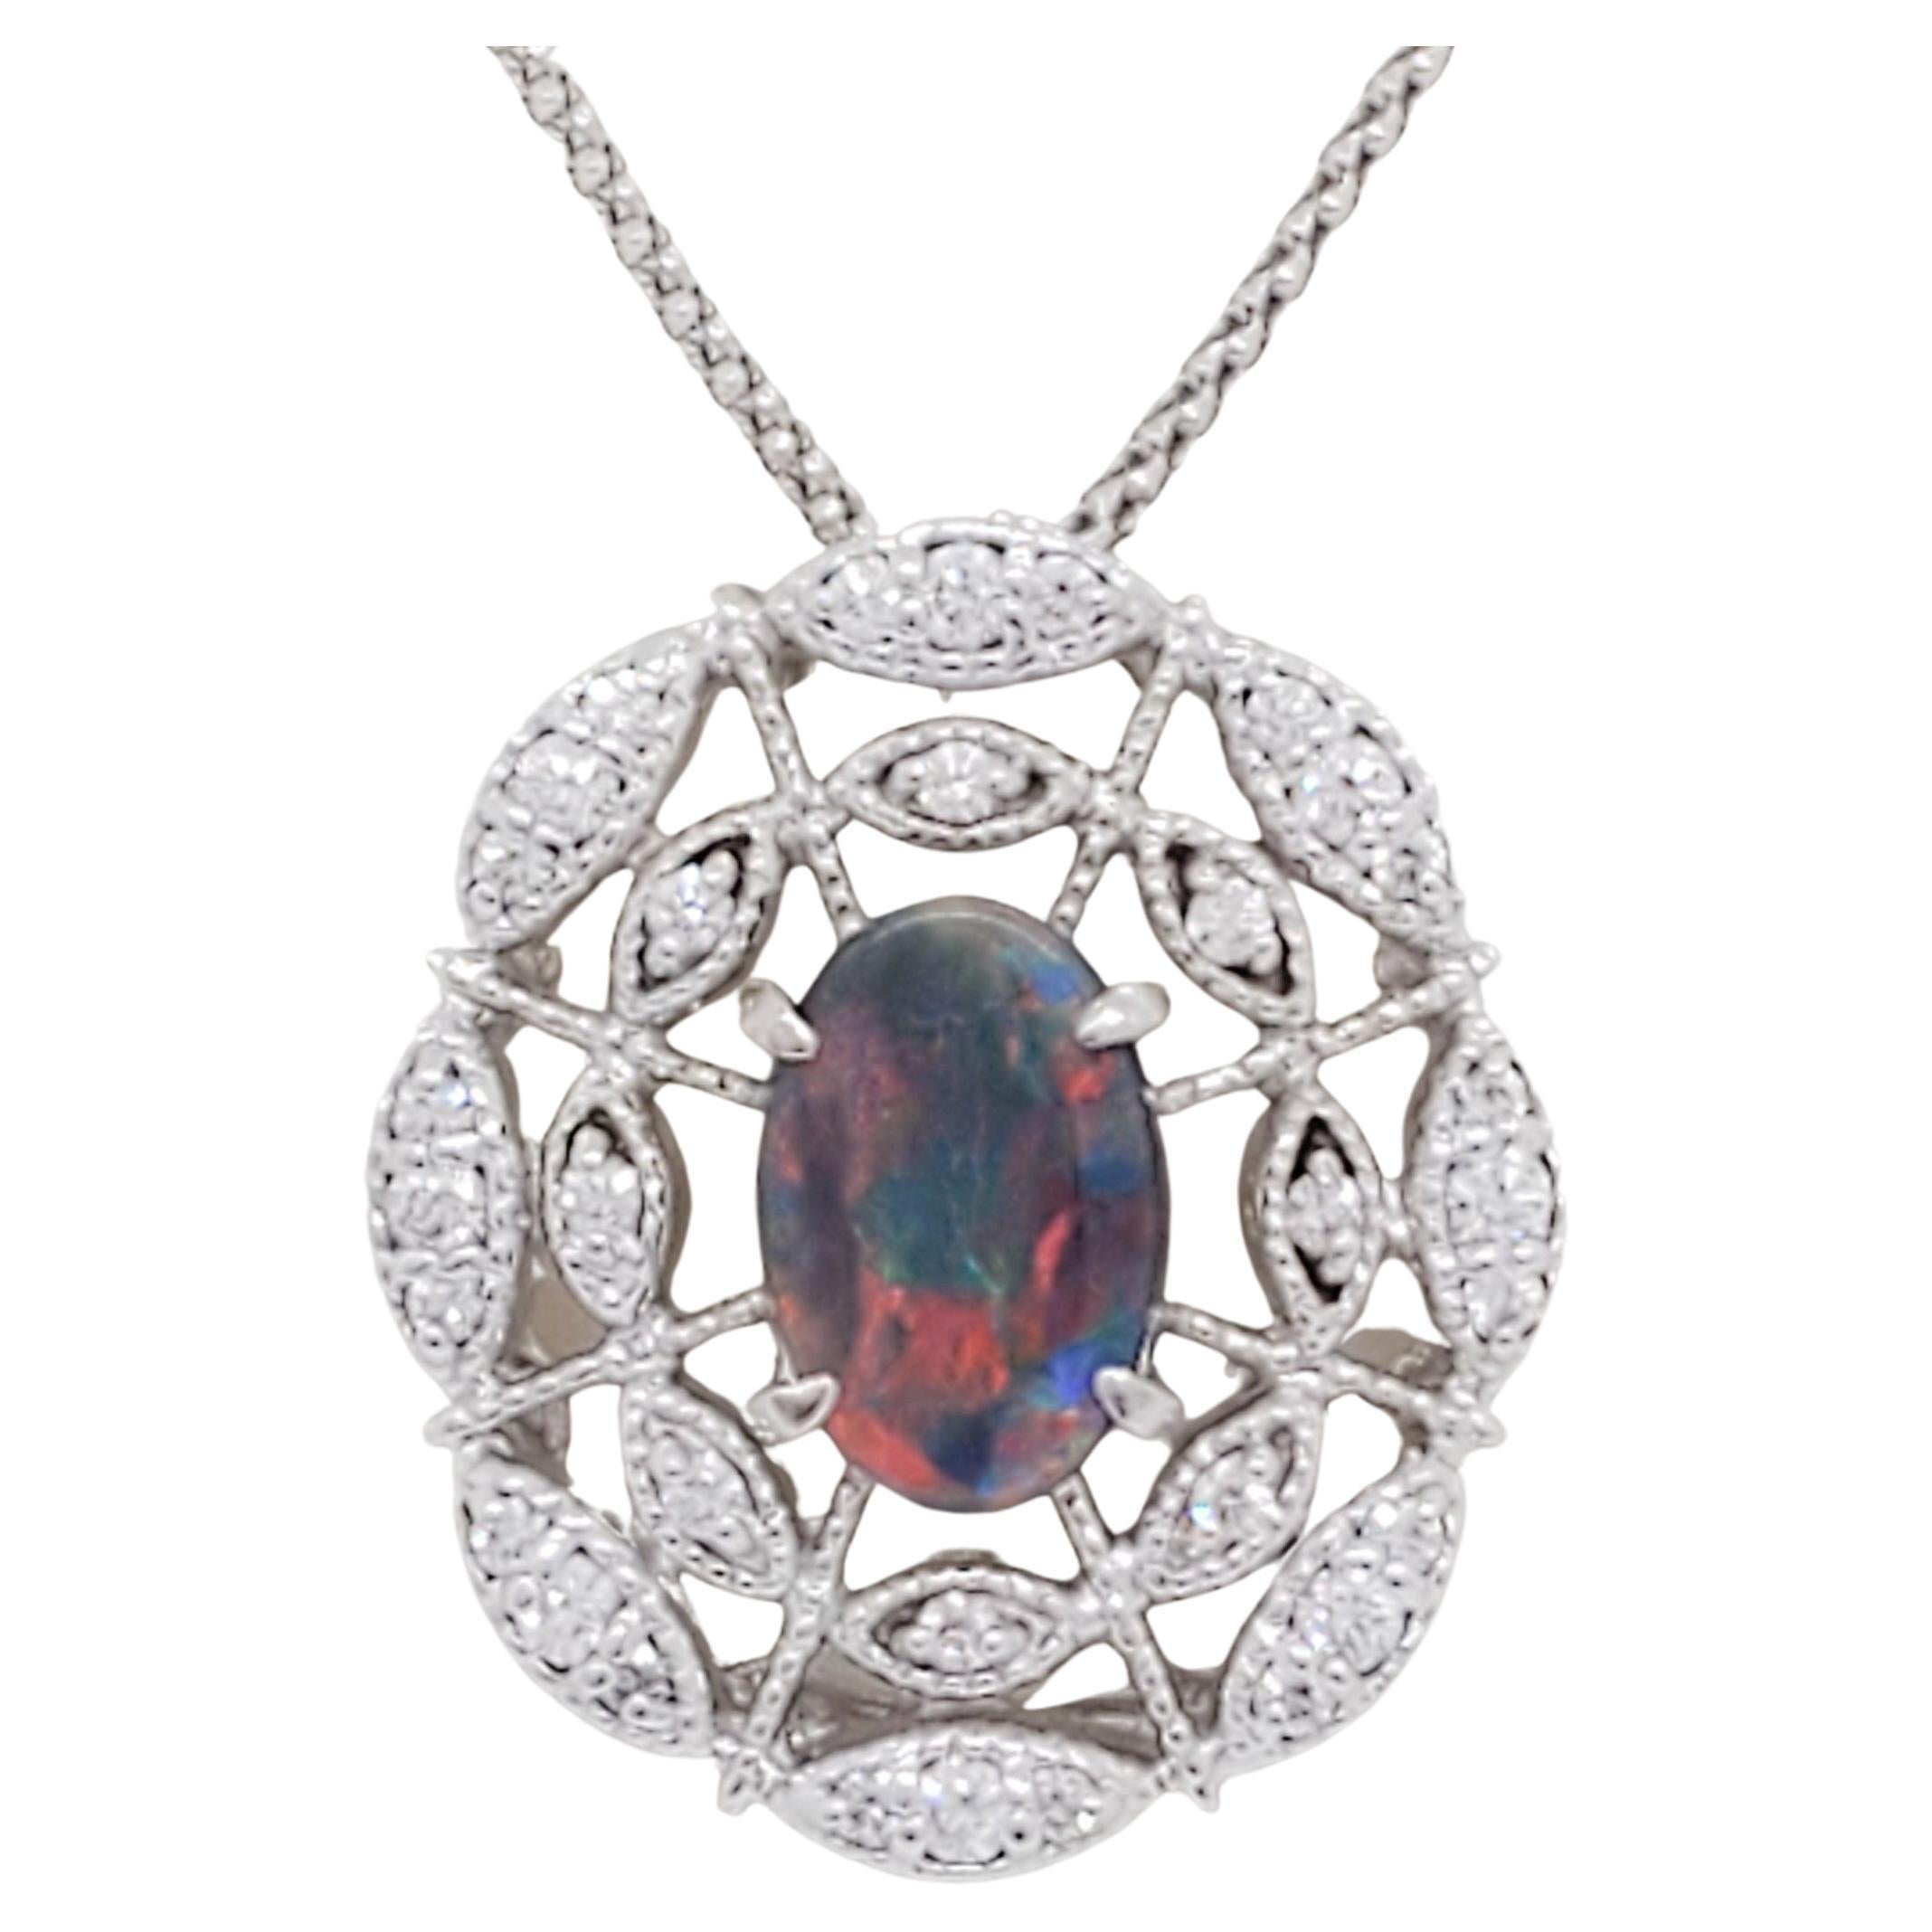 Black Opal and Diamond Pendant Necklace in 18k White Gold